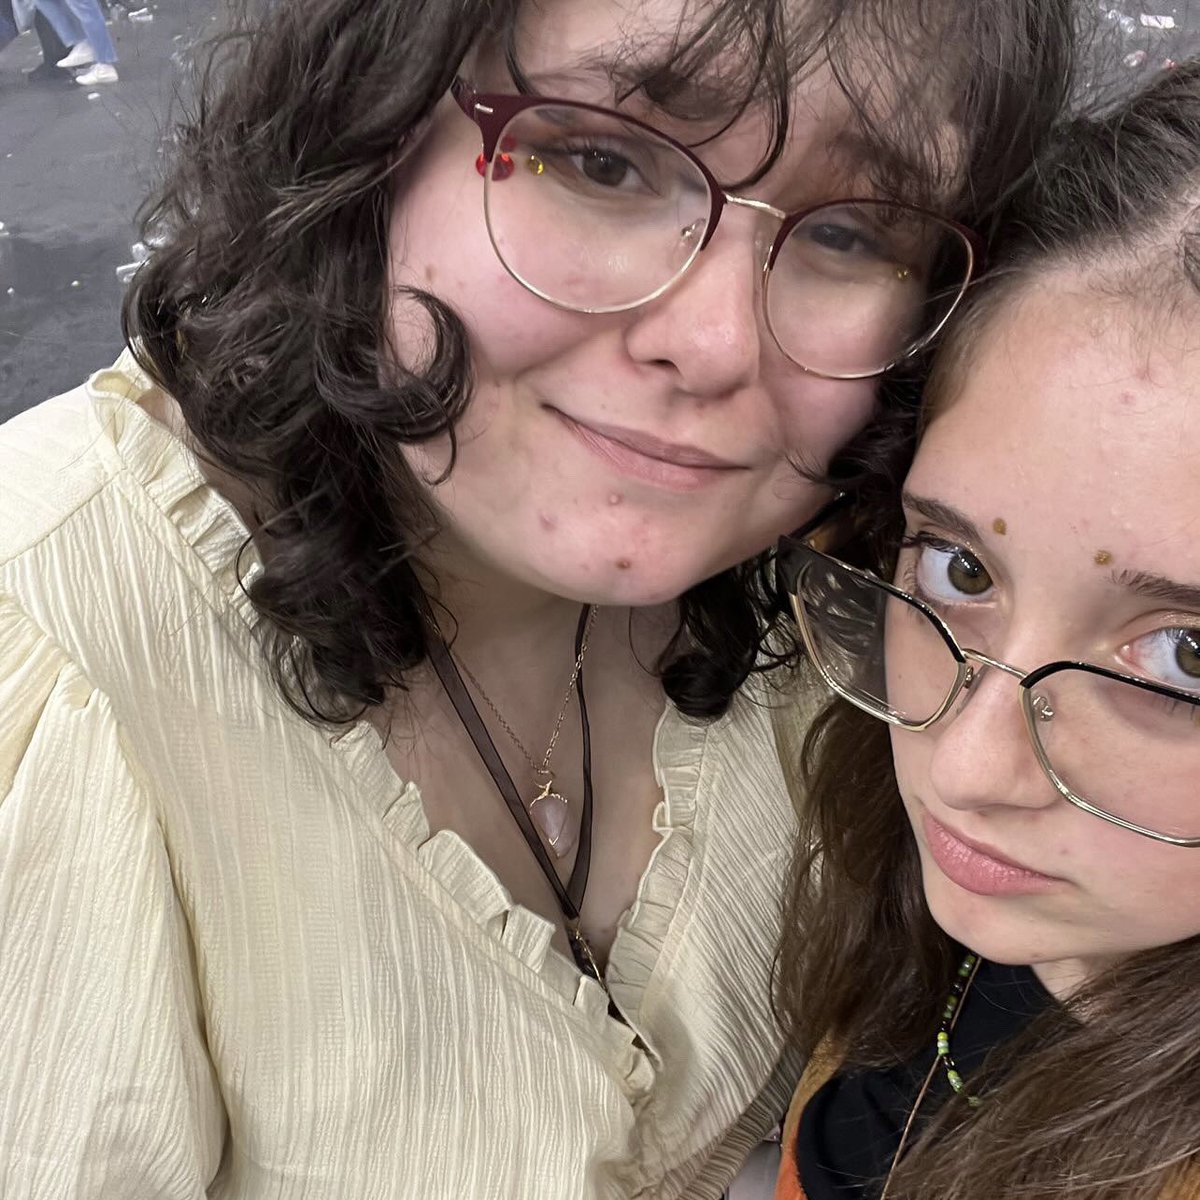 dig allentown was my first show ever, but i had been a fan of gvf since 2019. i couldn’t afford to go to a show before then, but it was absolutely magical. it was the first time i got to meet my best friend (@zipzippyyy) too.